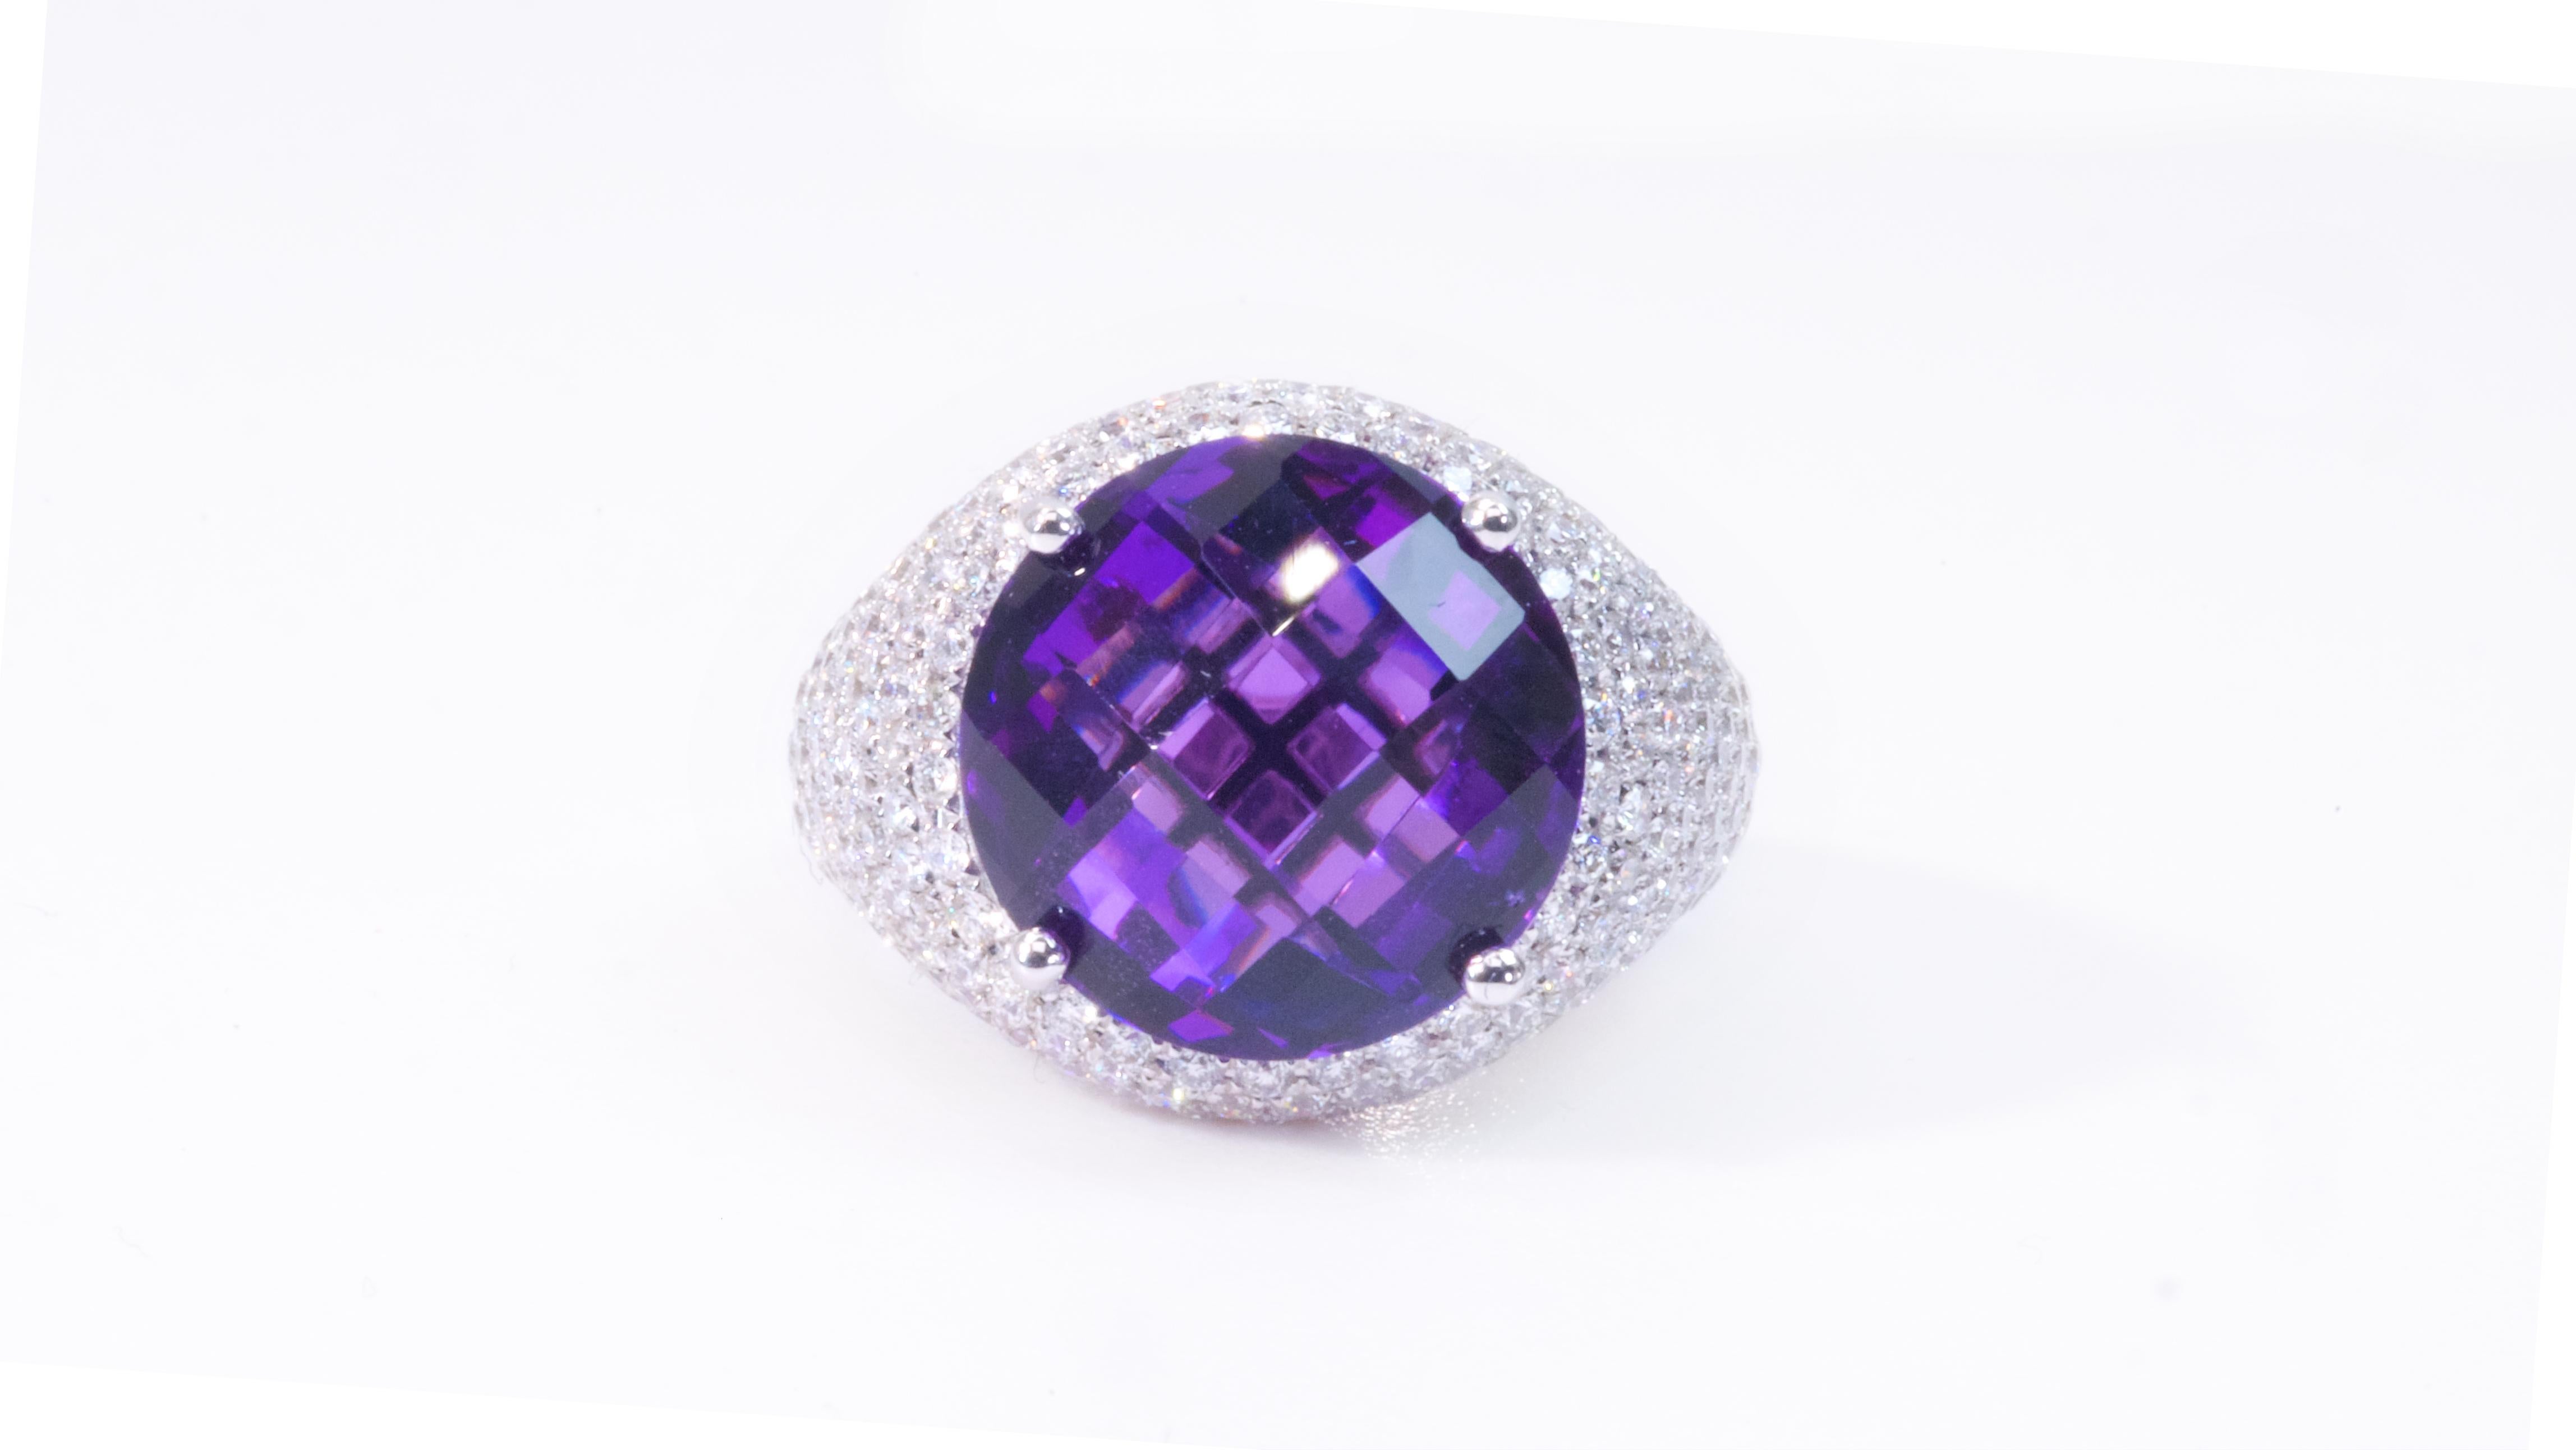 Stunning halo pave amethyst ring made from 18k white gold with 8.30 total carat of rose cut amethyst and round brilliant diamonds. This ring comes with an AIG certificate and a fancy box.

-1 amethyst main stone of 6.30 ct.
cut: rose cut
color: